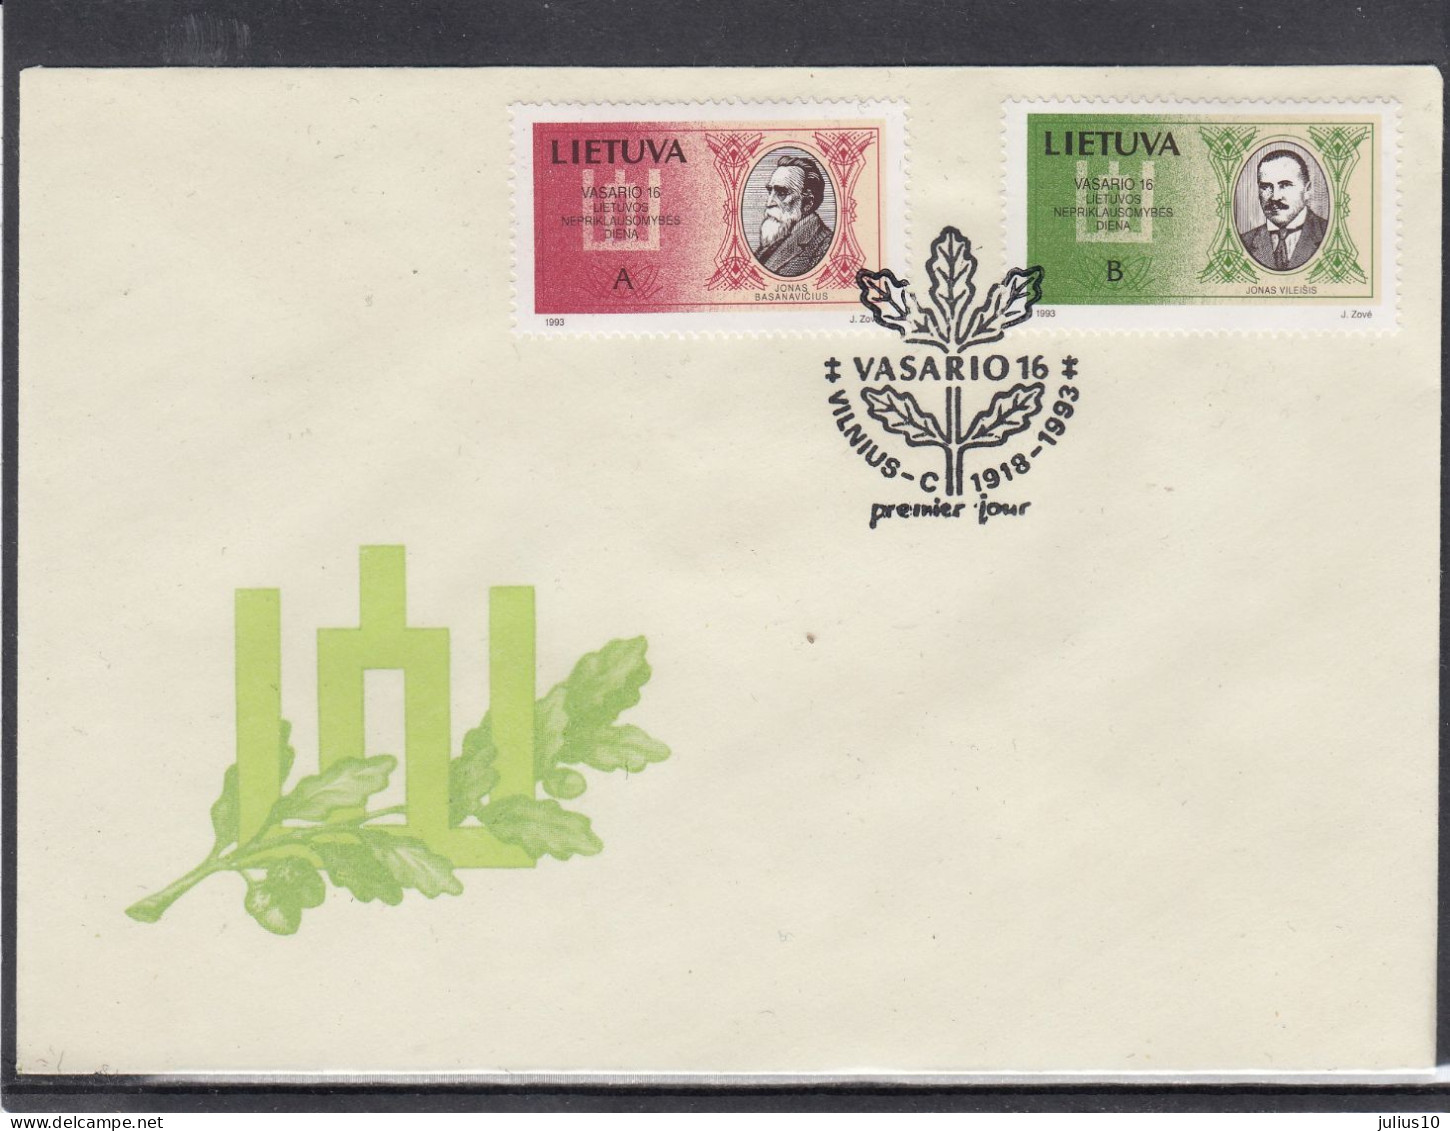 LITHUANIA 1993 Famous People FDC Mi 516-517 #LTV232 - Lithuania